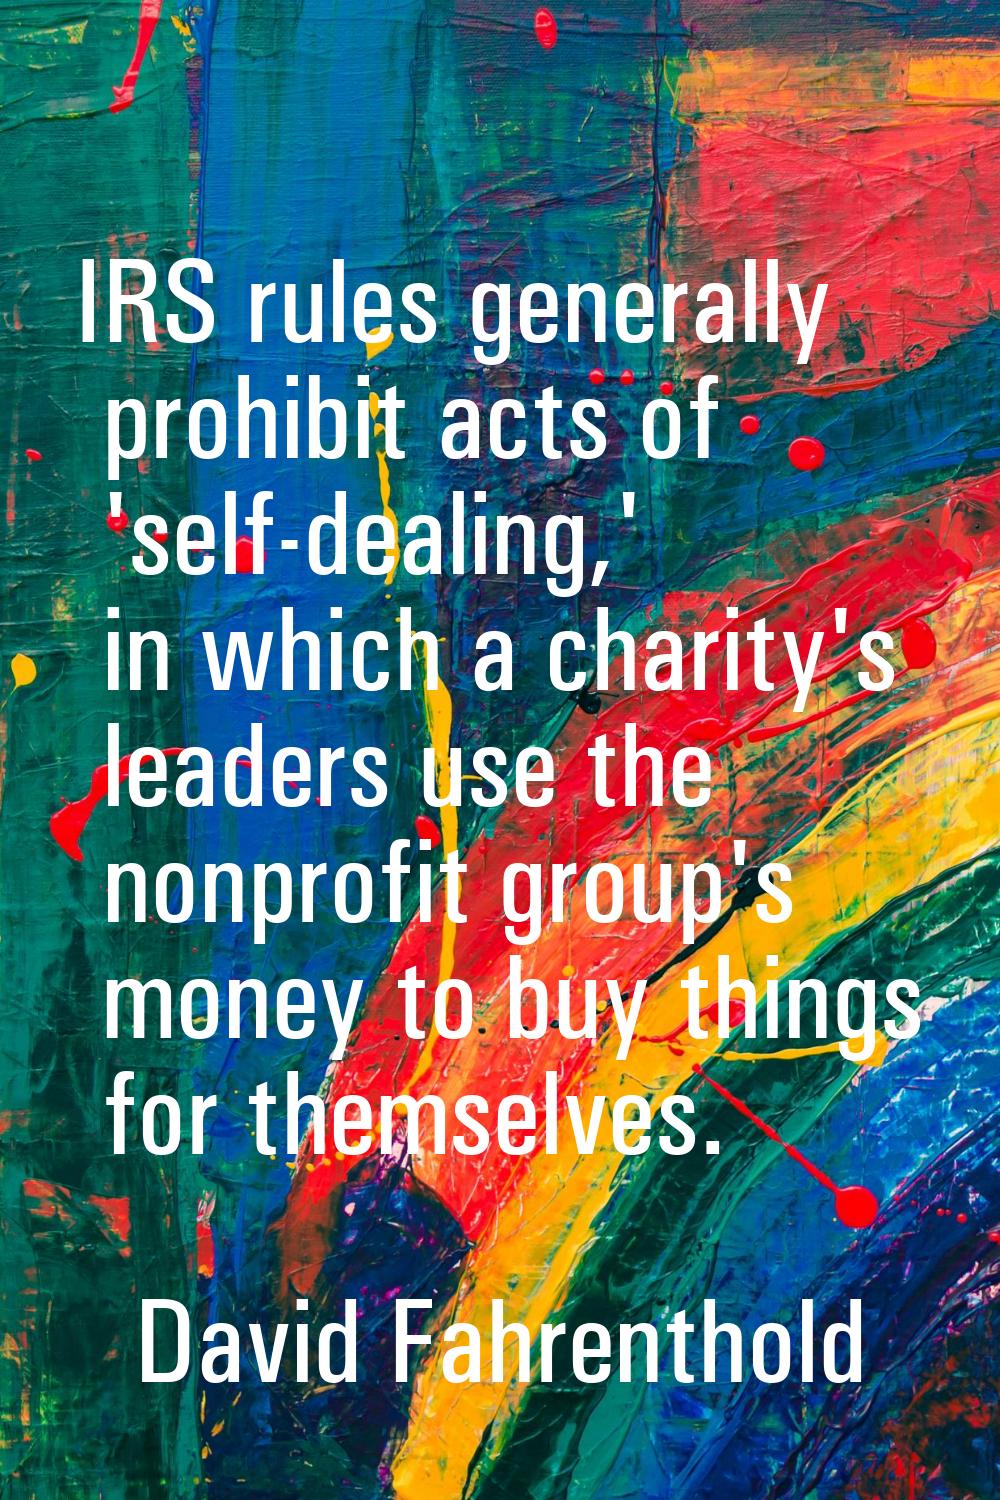 IRS rules generally prohibit acts of 'self-dealing,' in which a charity's leaders use the nonprofit